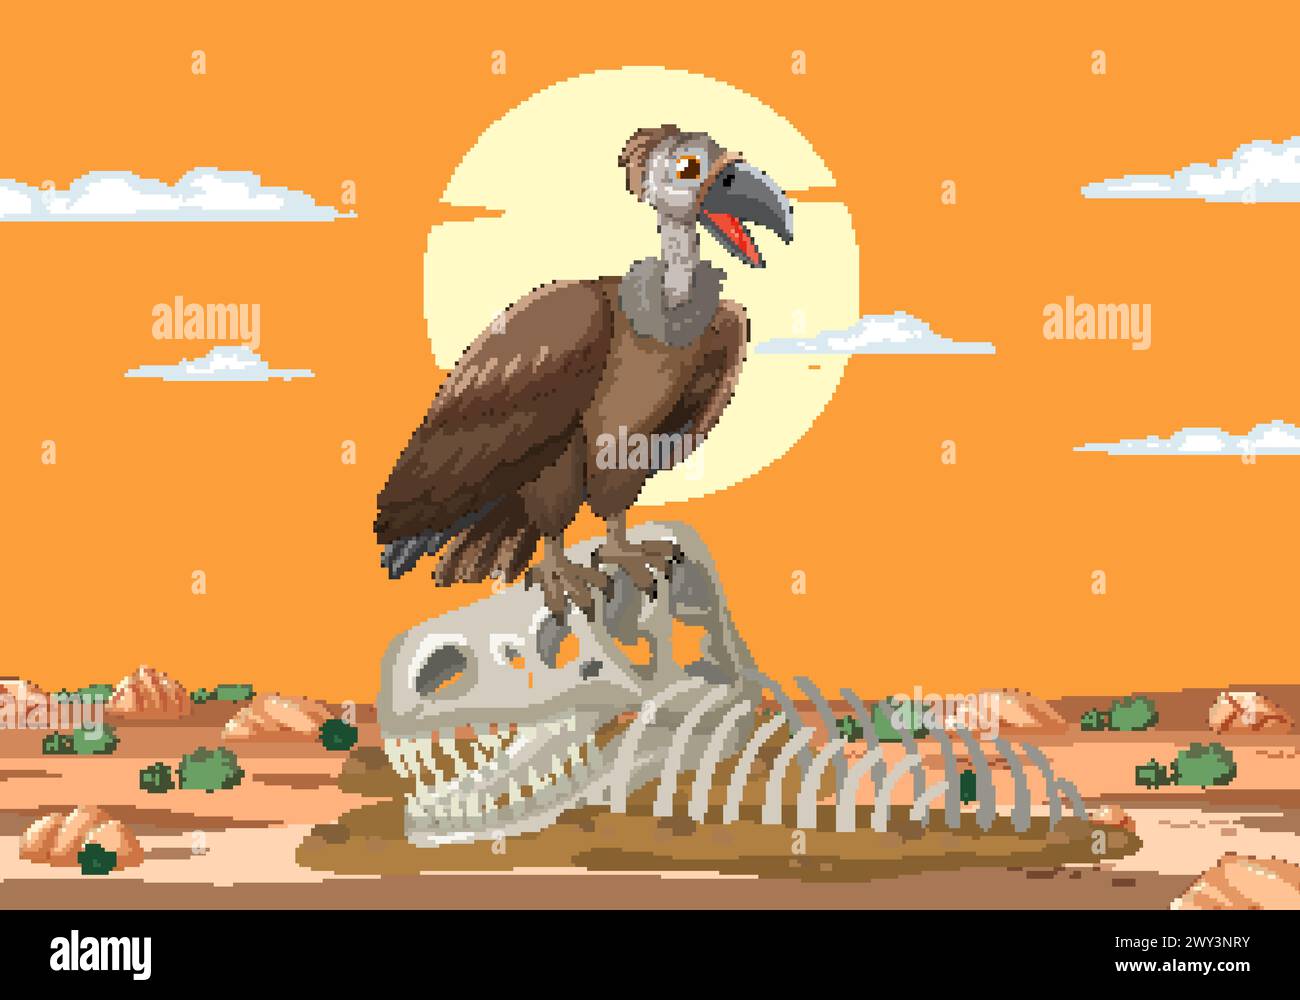 Illustration of a vulture atop animal remains in desert Stock Vector